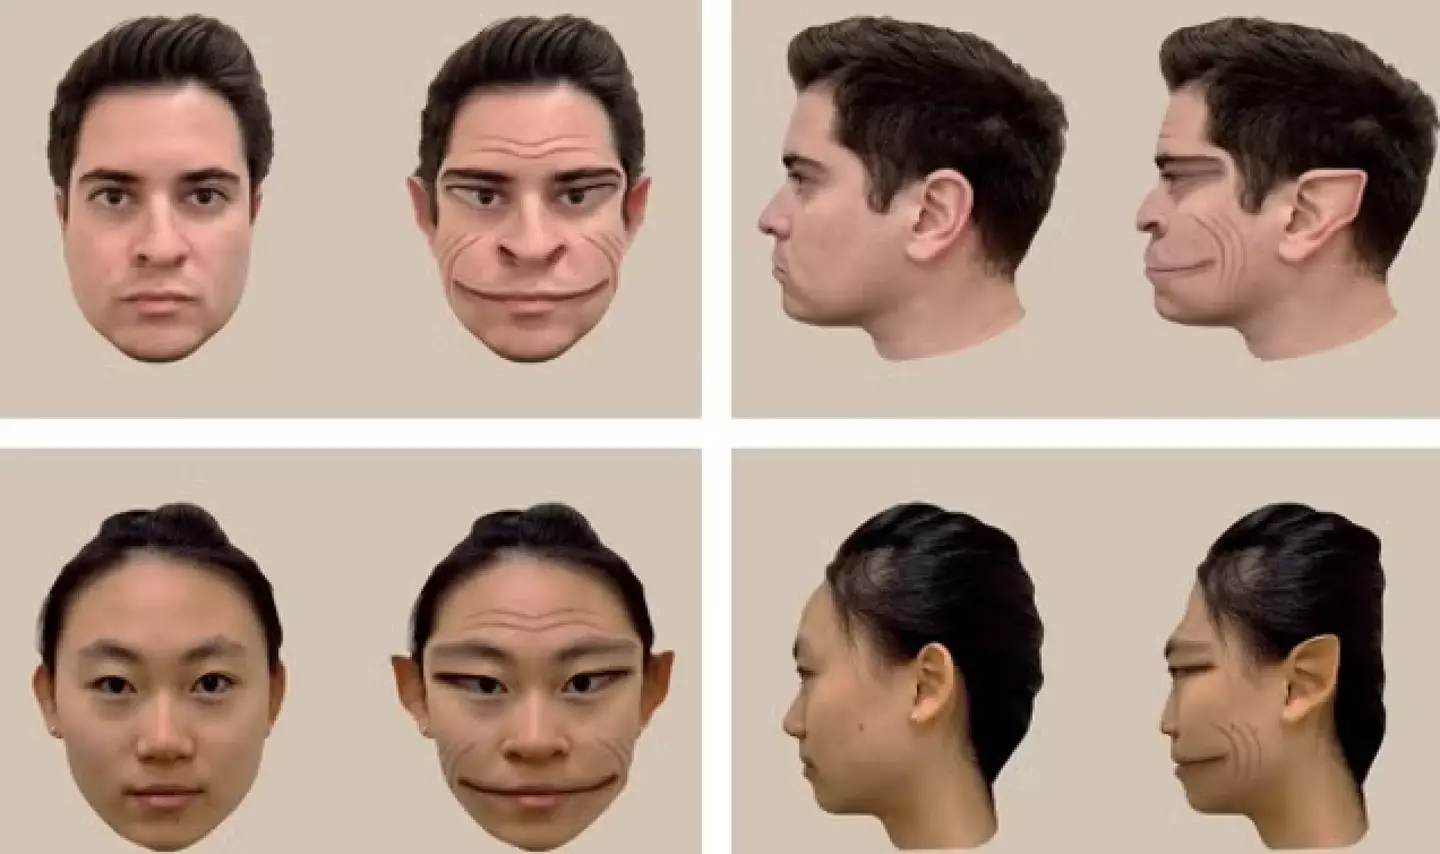 The condition makes people appear with distorted faces.